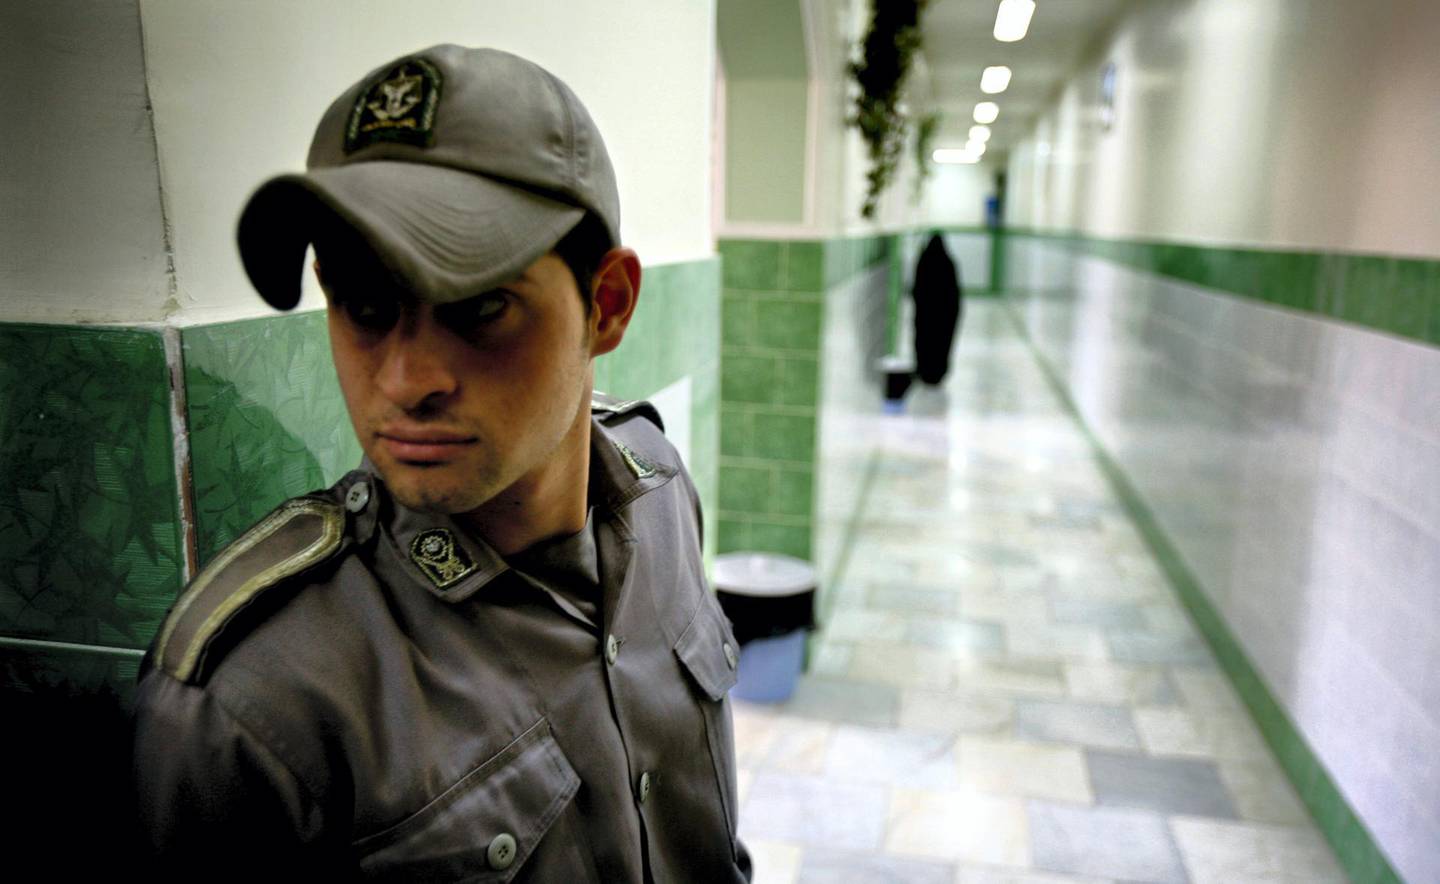 A prison guard stands along a corridor in Tehran's Evin prison June 13, 2006. Iranian police detained 70 people at a demonstration in favour of women's rights, the judiciary said on Tuesday, adding it was ready to review reports that the police had beaten some demonstrators.